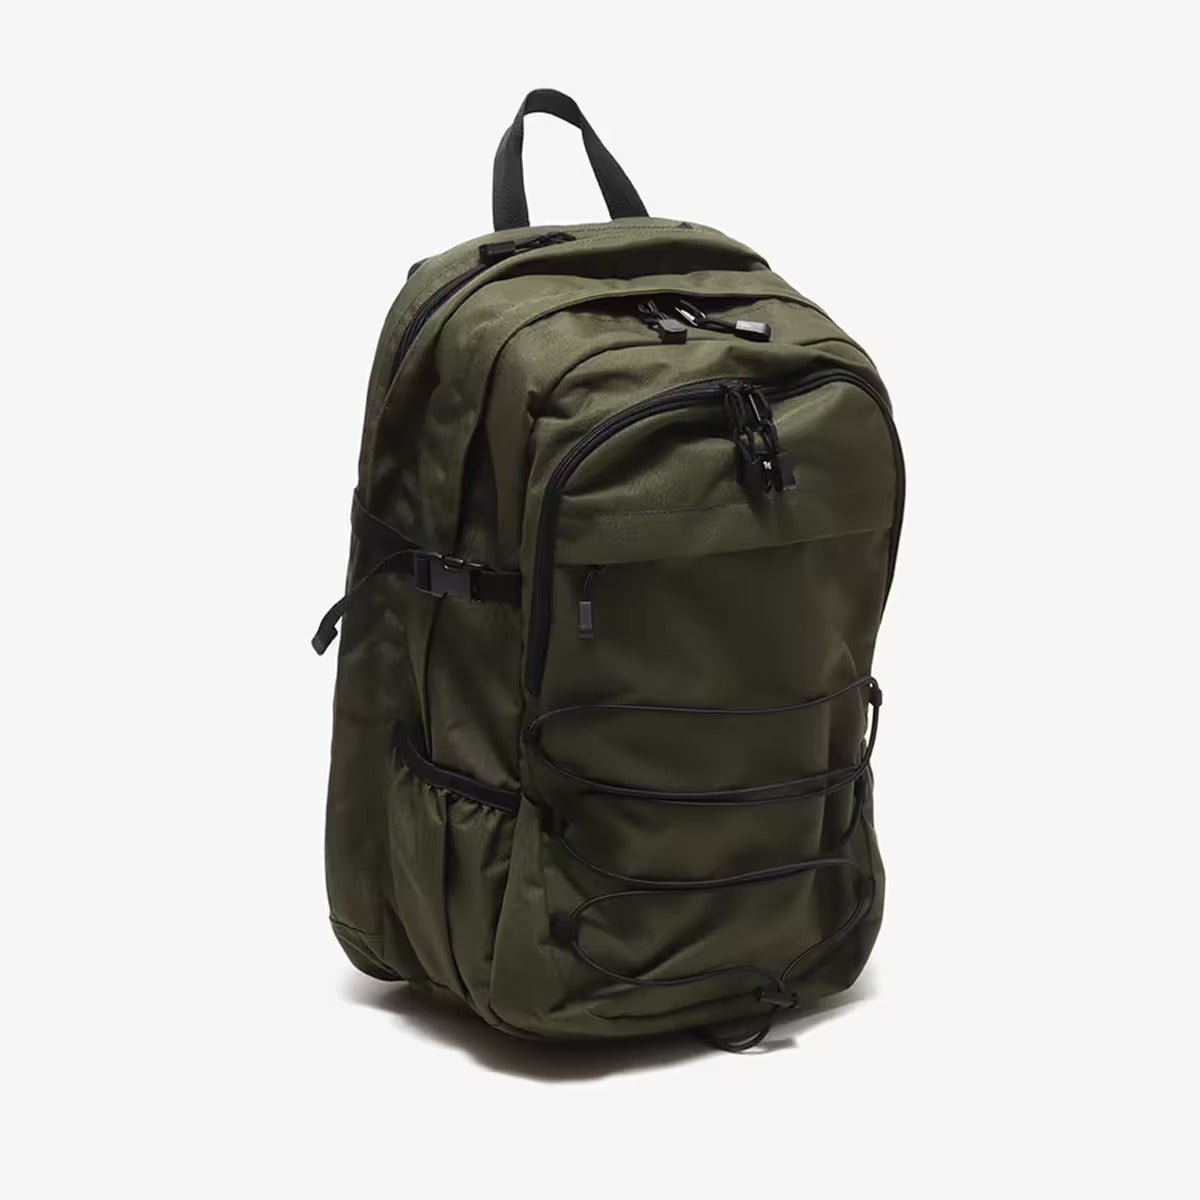 ATMOS BACK PACK